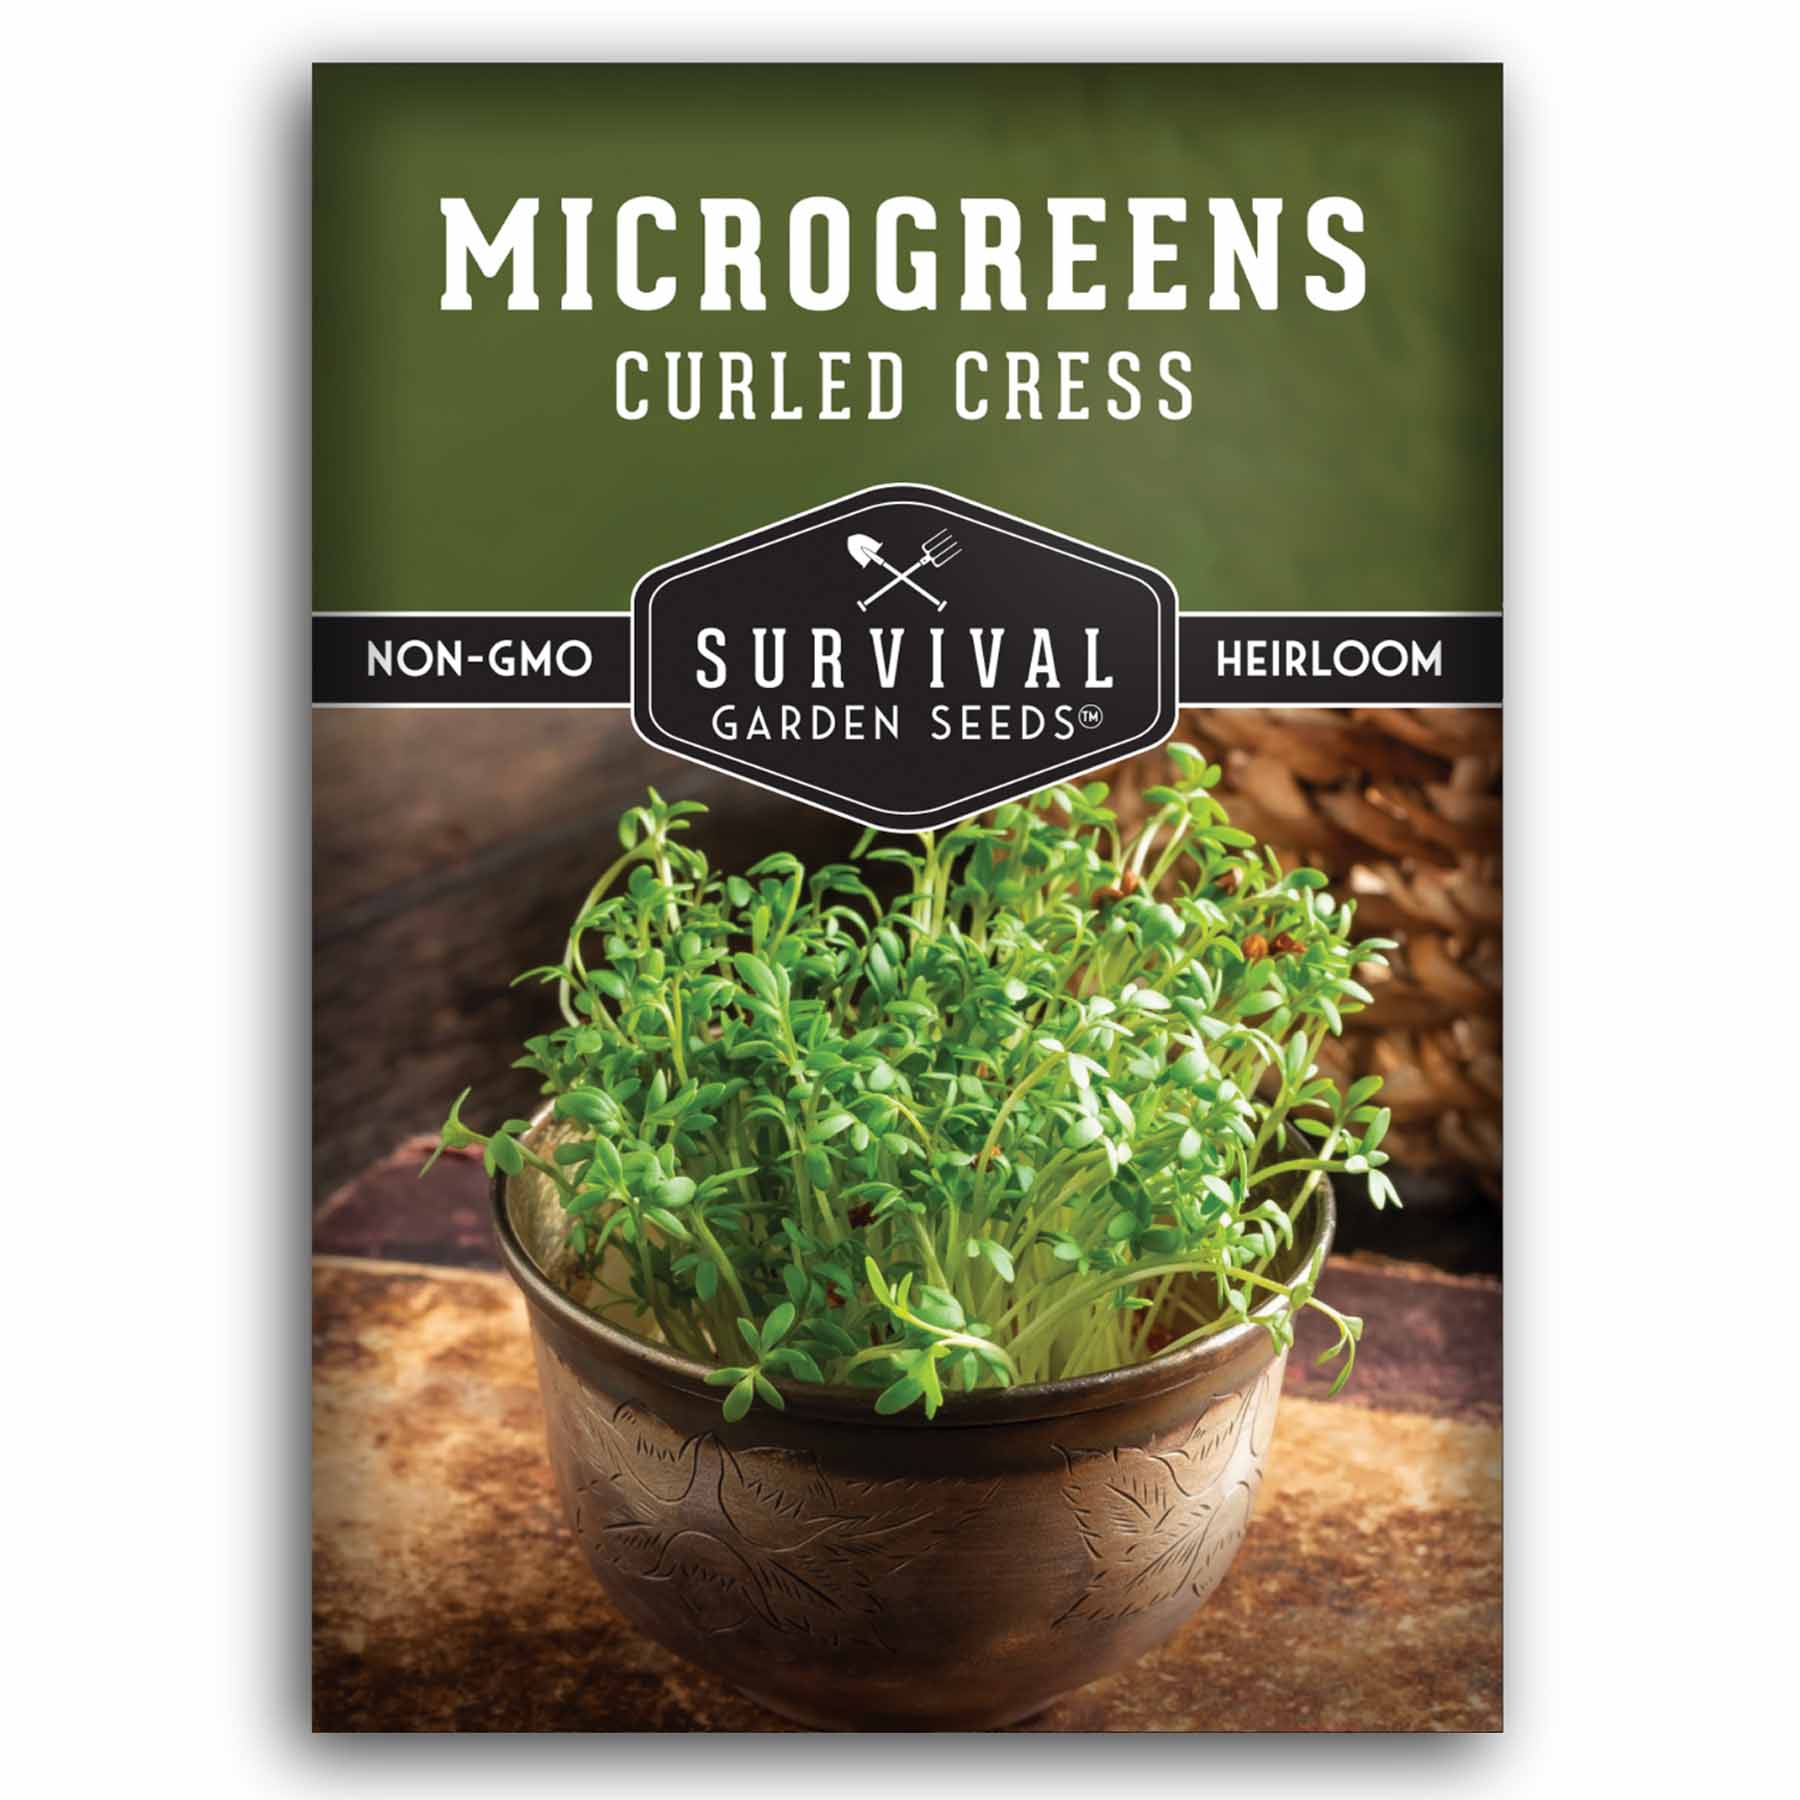 1 pack of Curled Cress Microgreens seeds